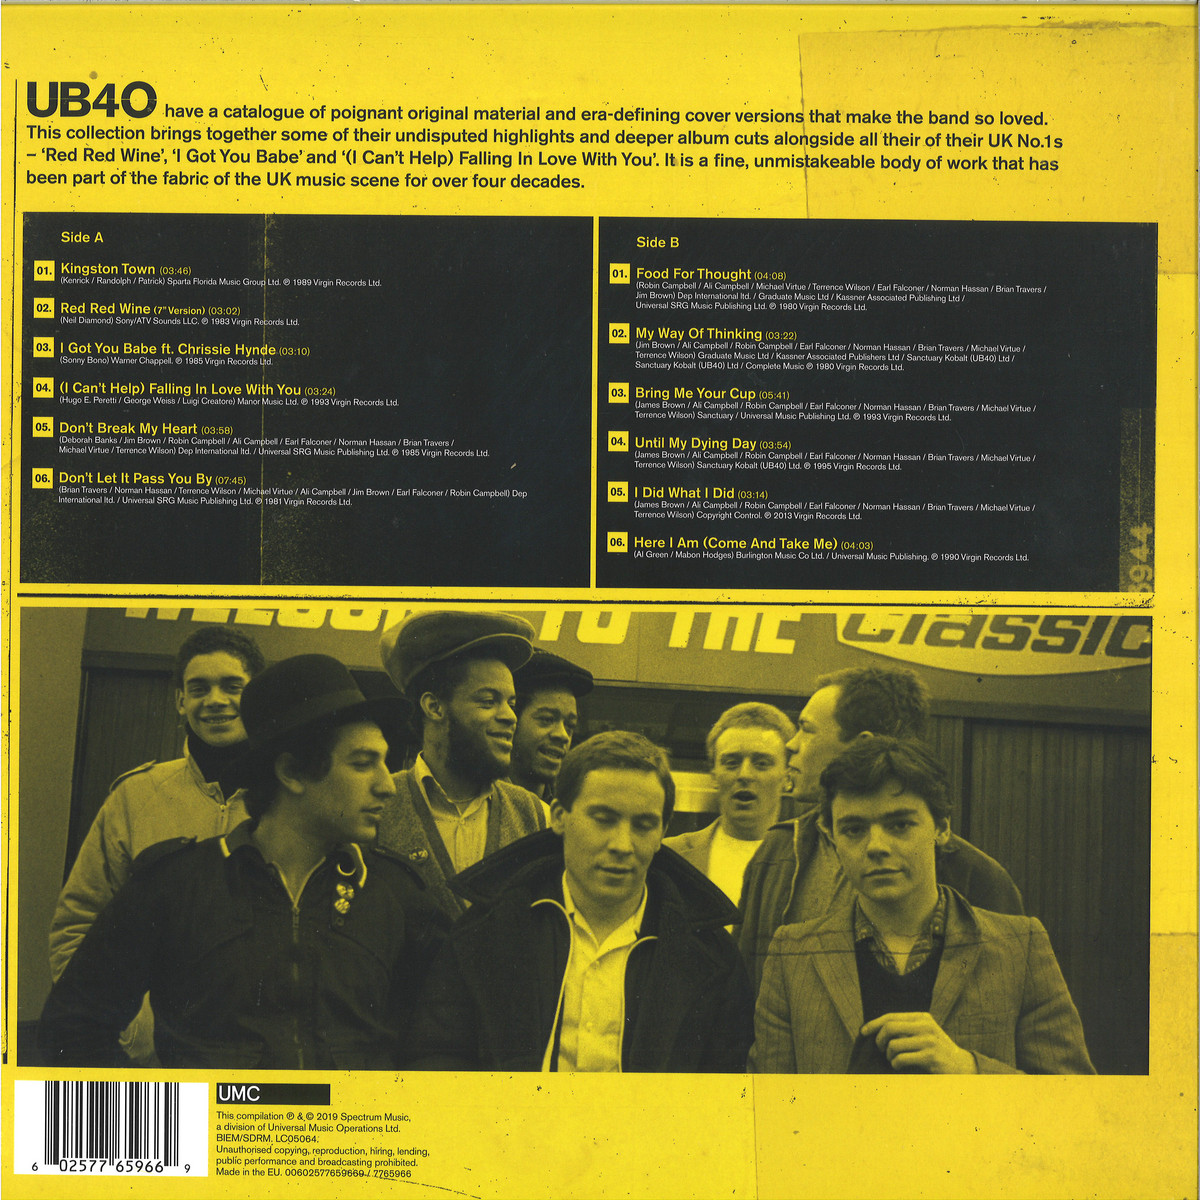 UB40 - Red, Red Wine: The Collection / UMC 7765966 - Vinyl